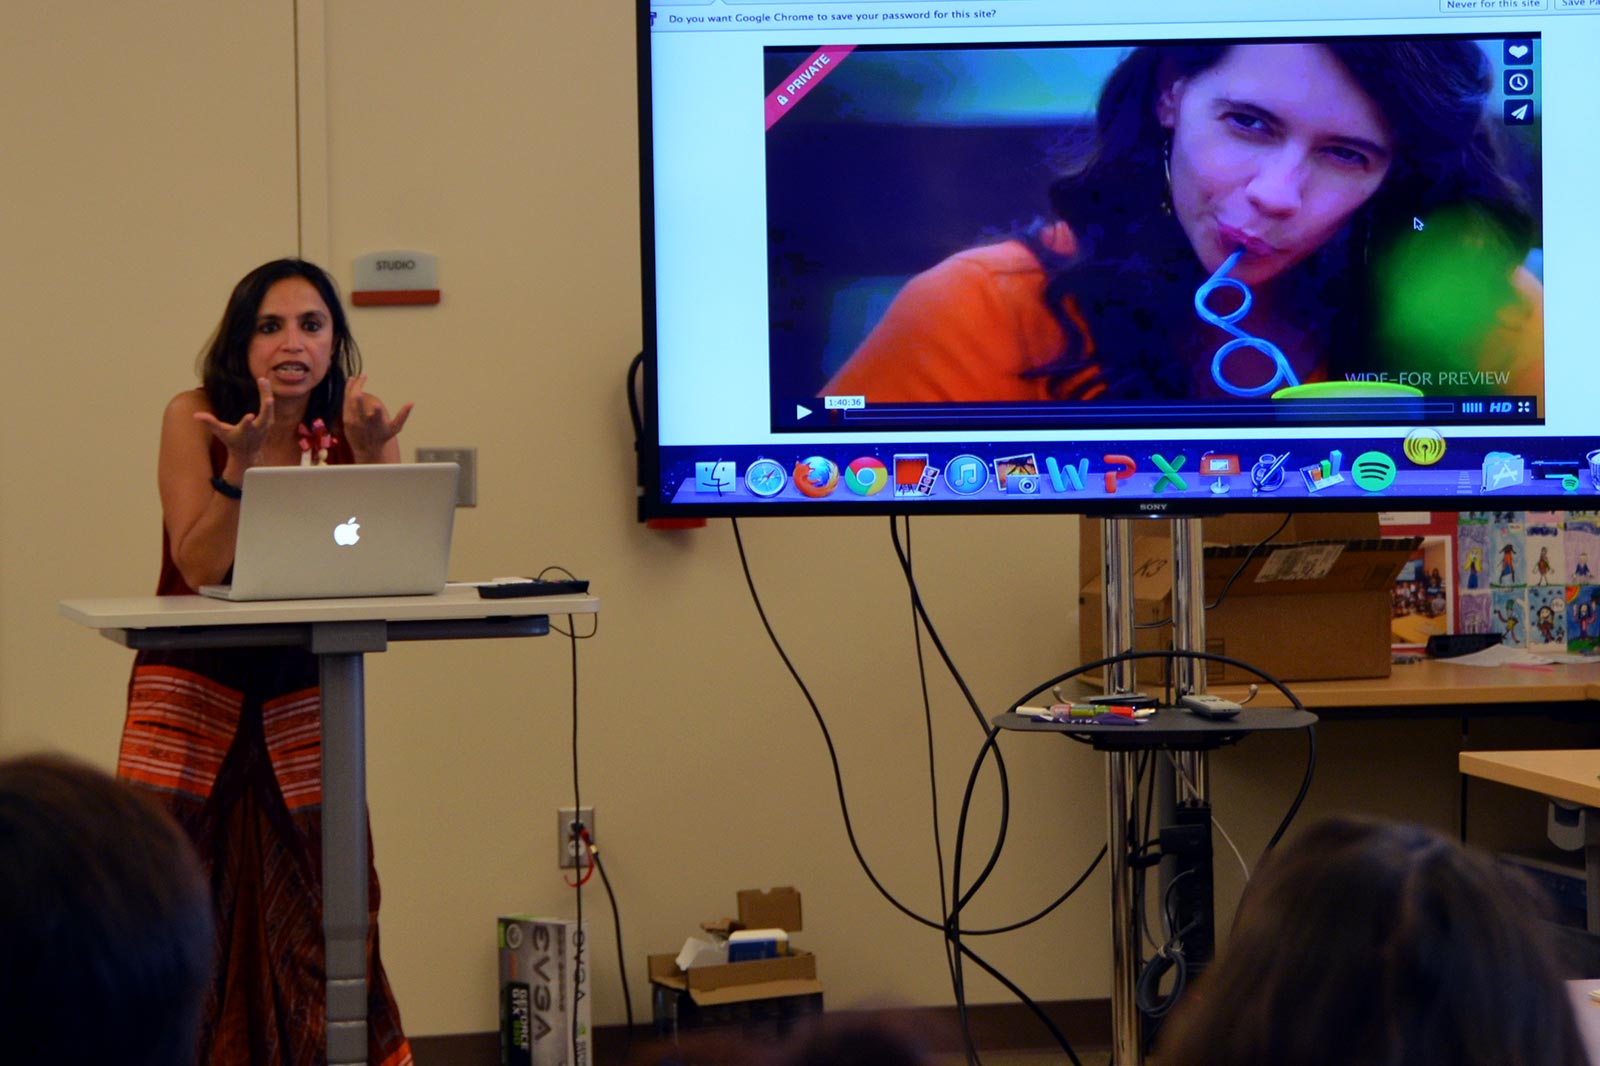 Shonali Bose speaks at a podium while presenting on a screen.